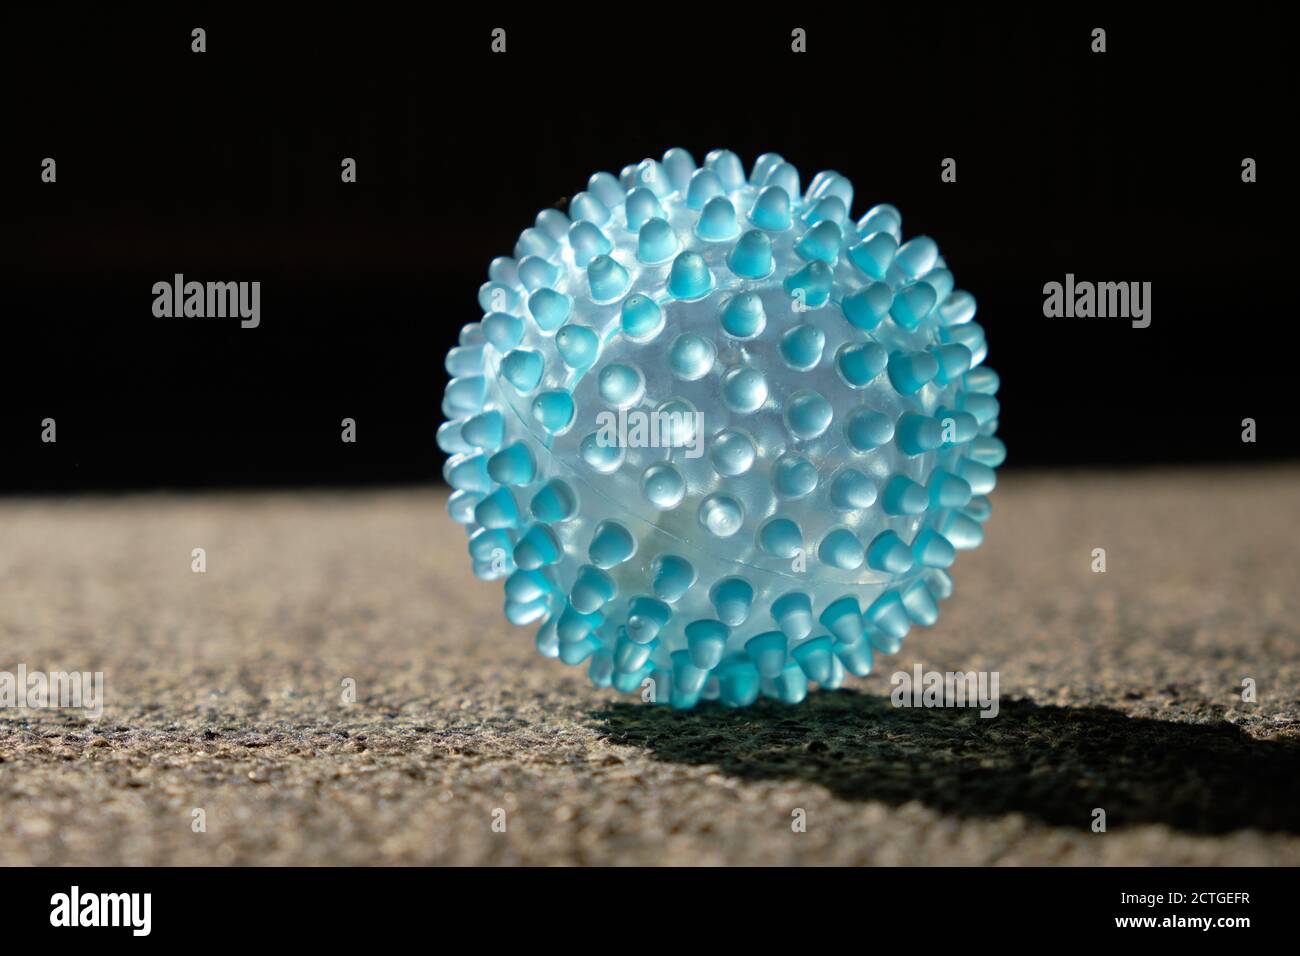 Bright blue transparent massage ball lying in the sun on short brown carpet and looking like a virus. Seen in Germany in September. Stock Photo